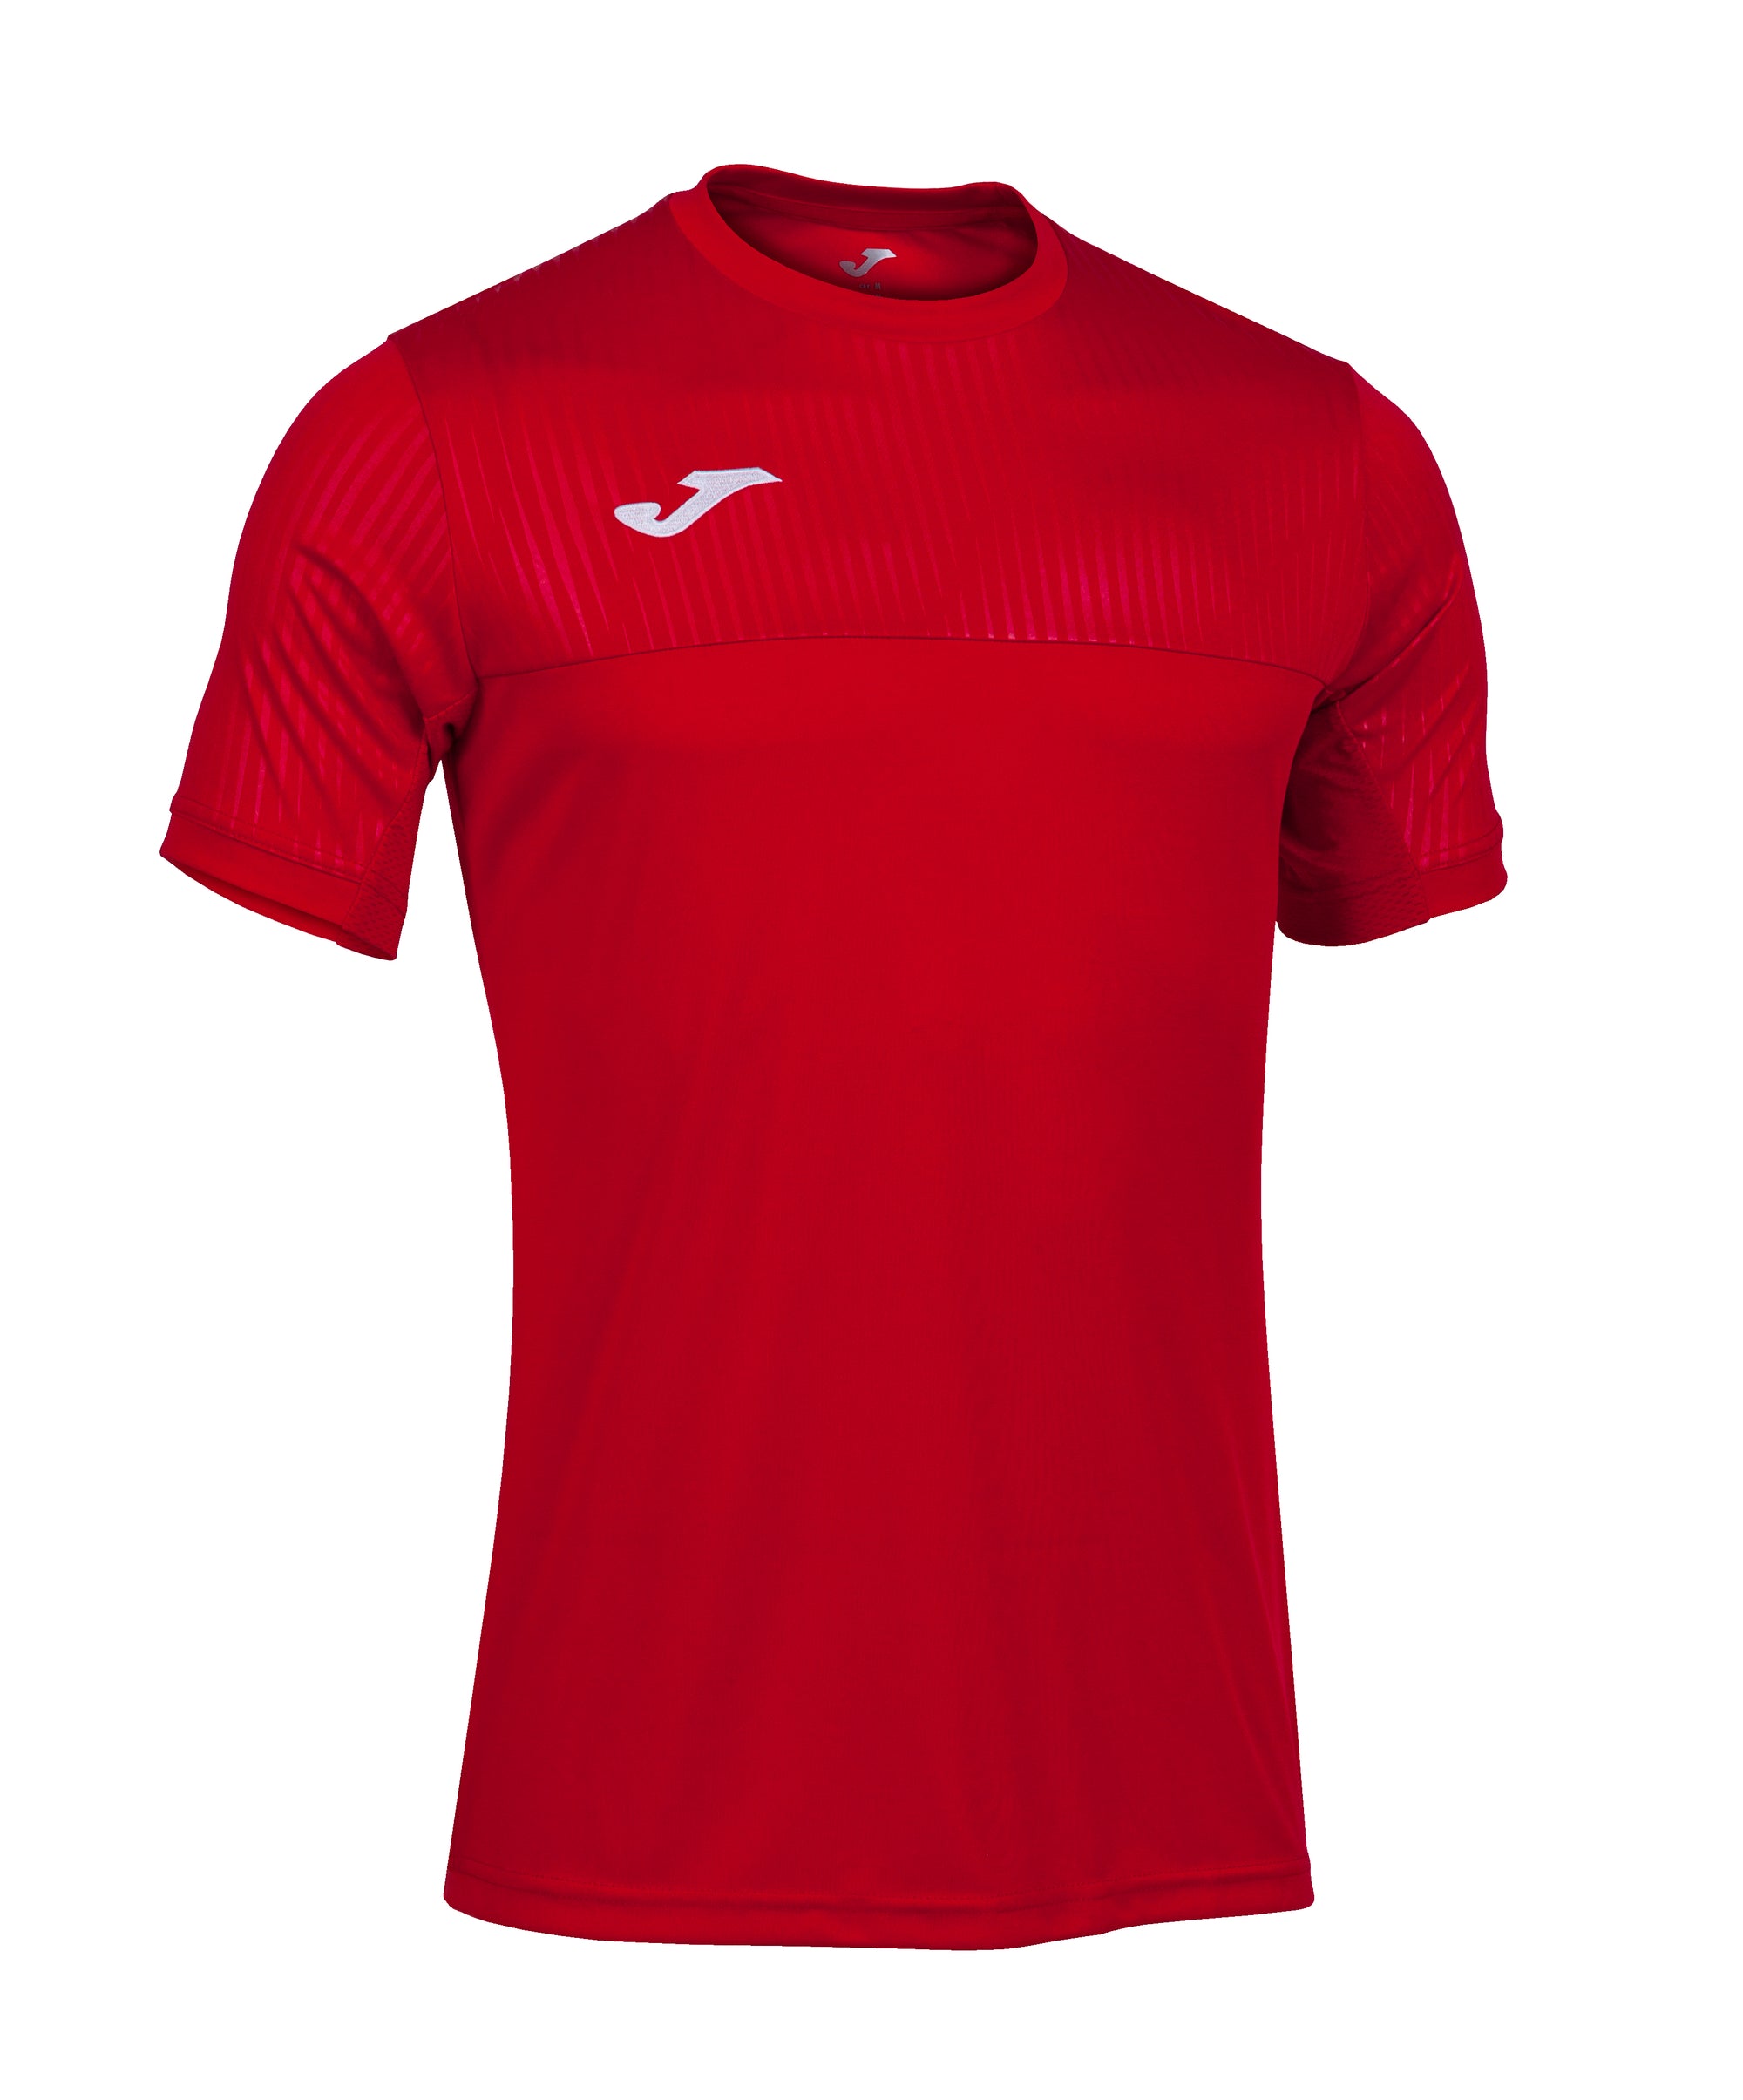 Joma Montreal Short Sleeve T-Shirt - Red